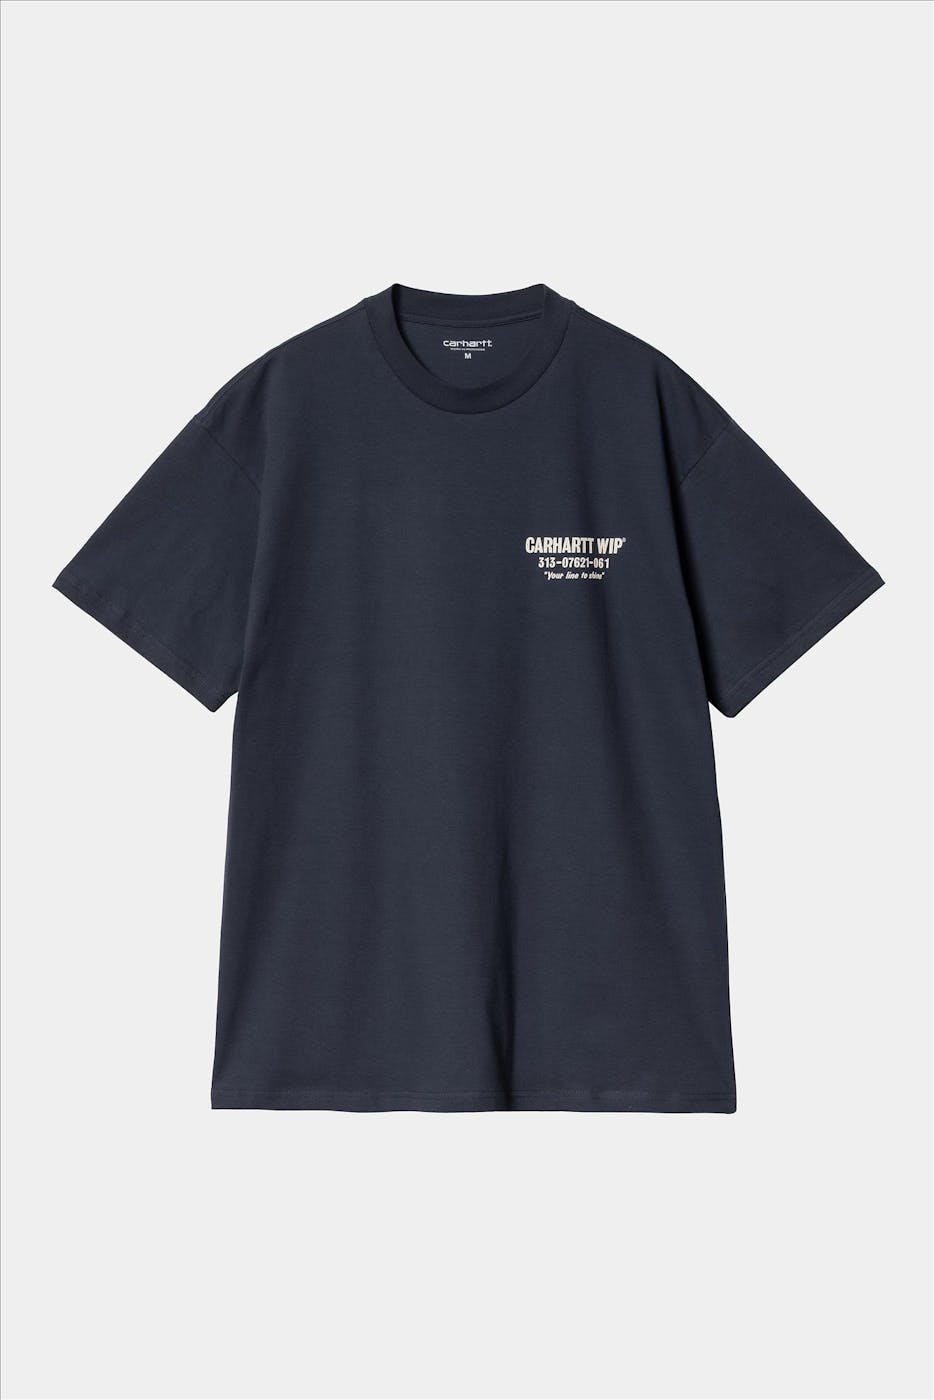 Carhartt WIP - Donkerblauwe Less Troubles T-shirt